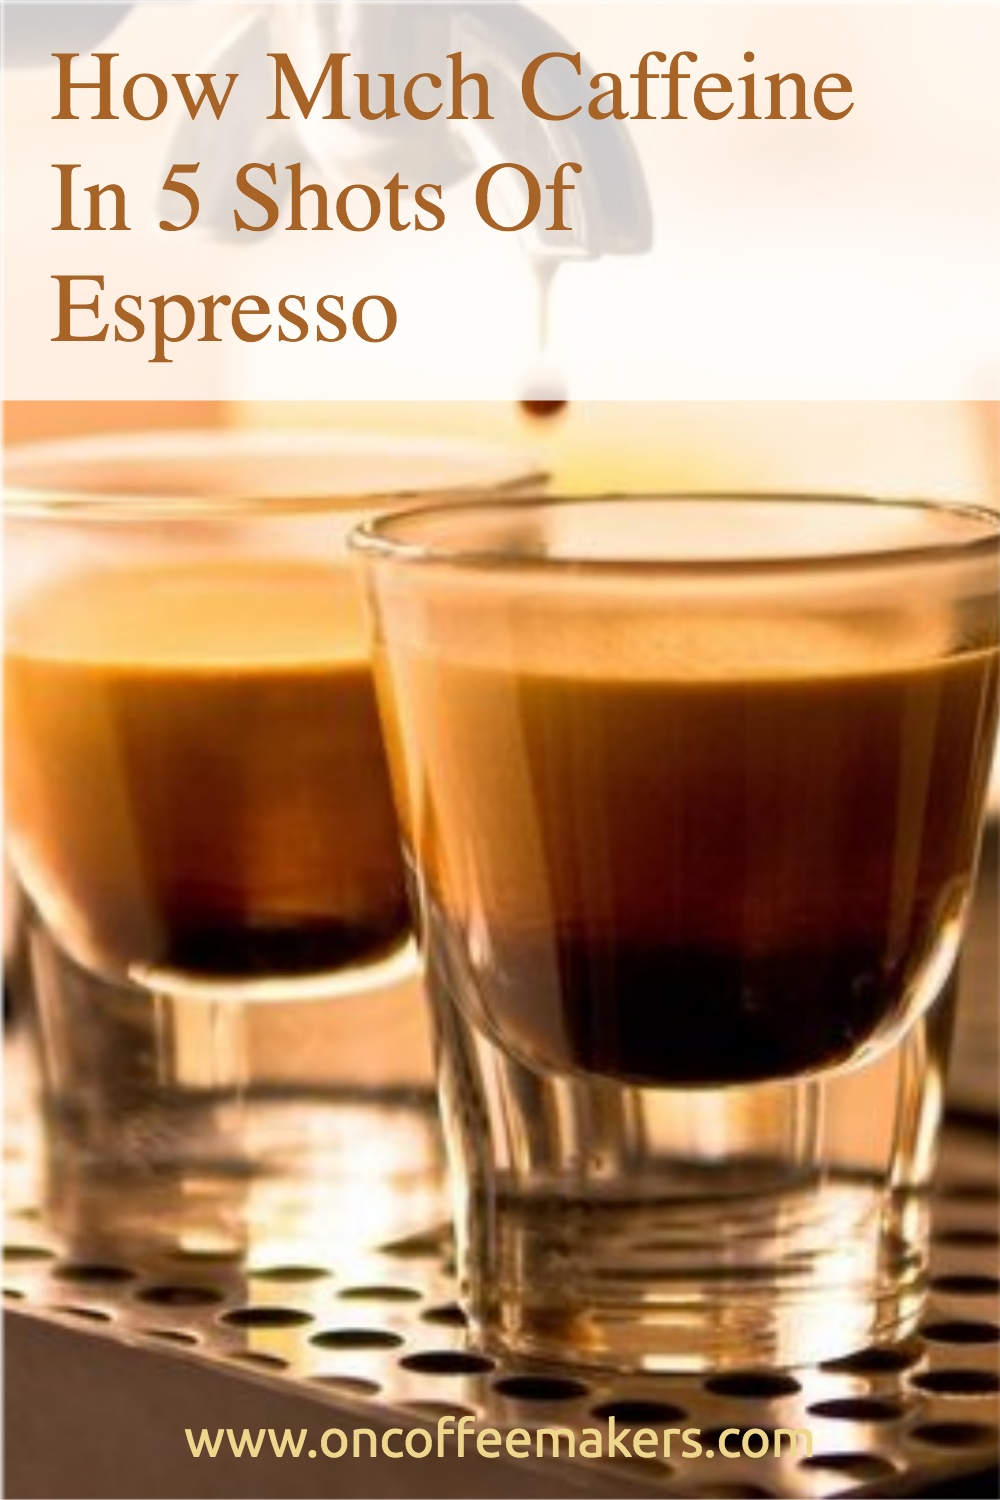 How Much Caffeine is in 5 Shots of Espresso? 